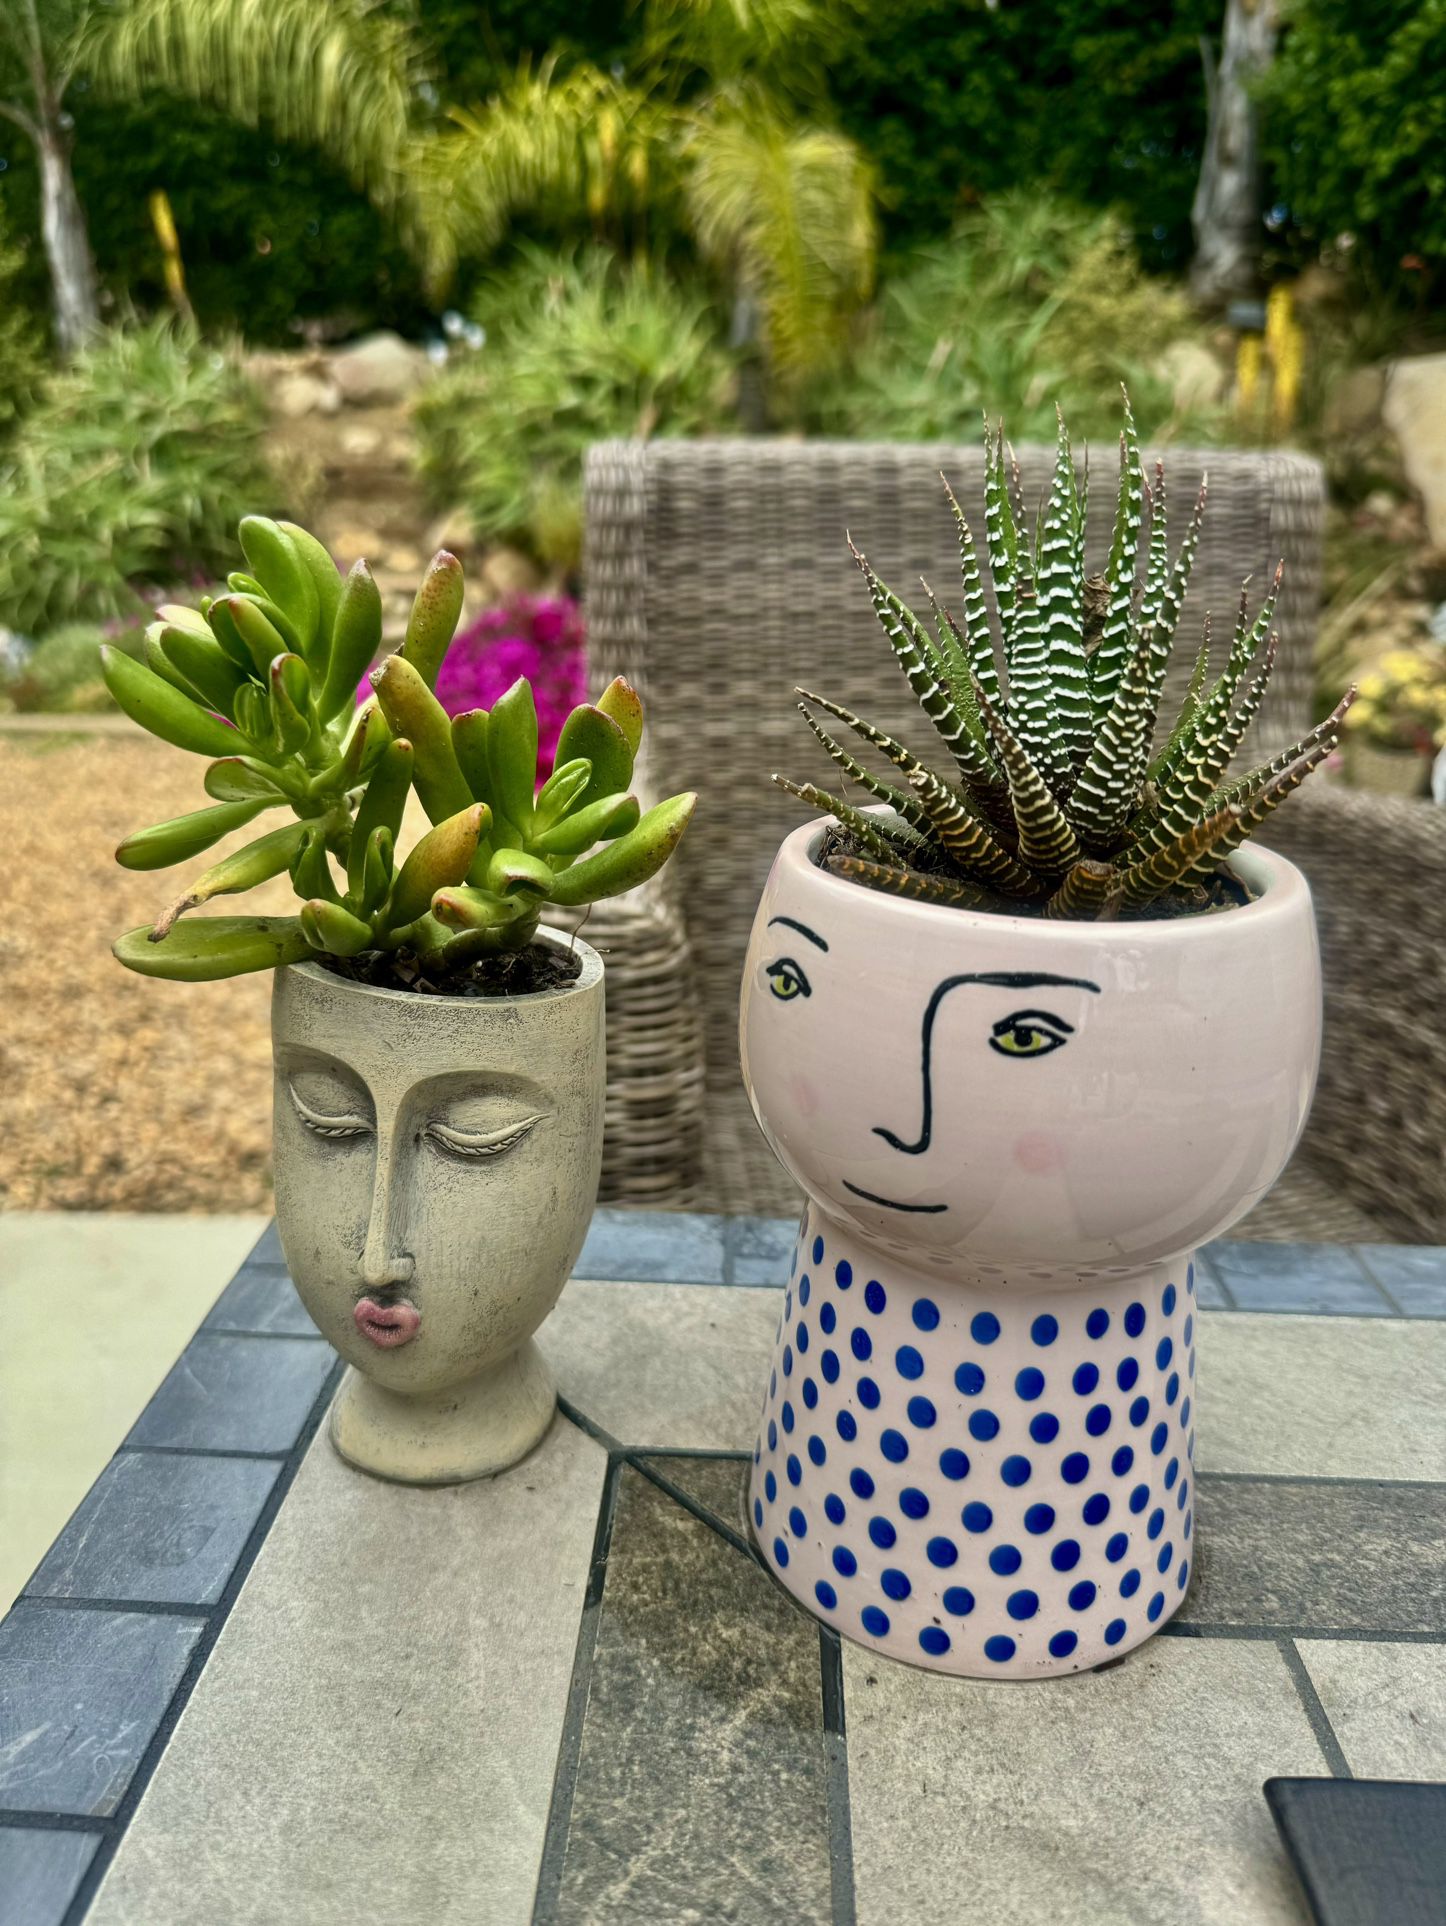 😍😍 Face Planter Duo - Two Face Planters w Plants Included 